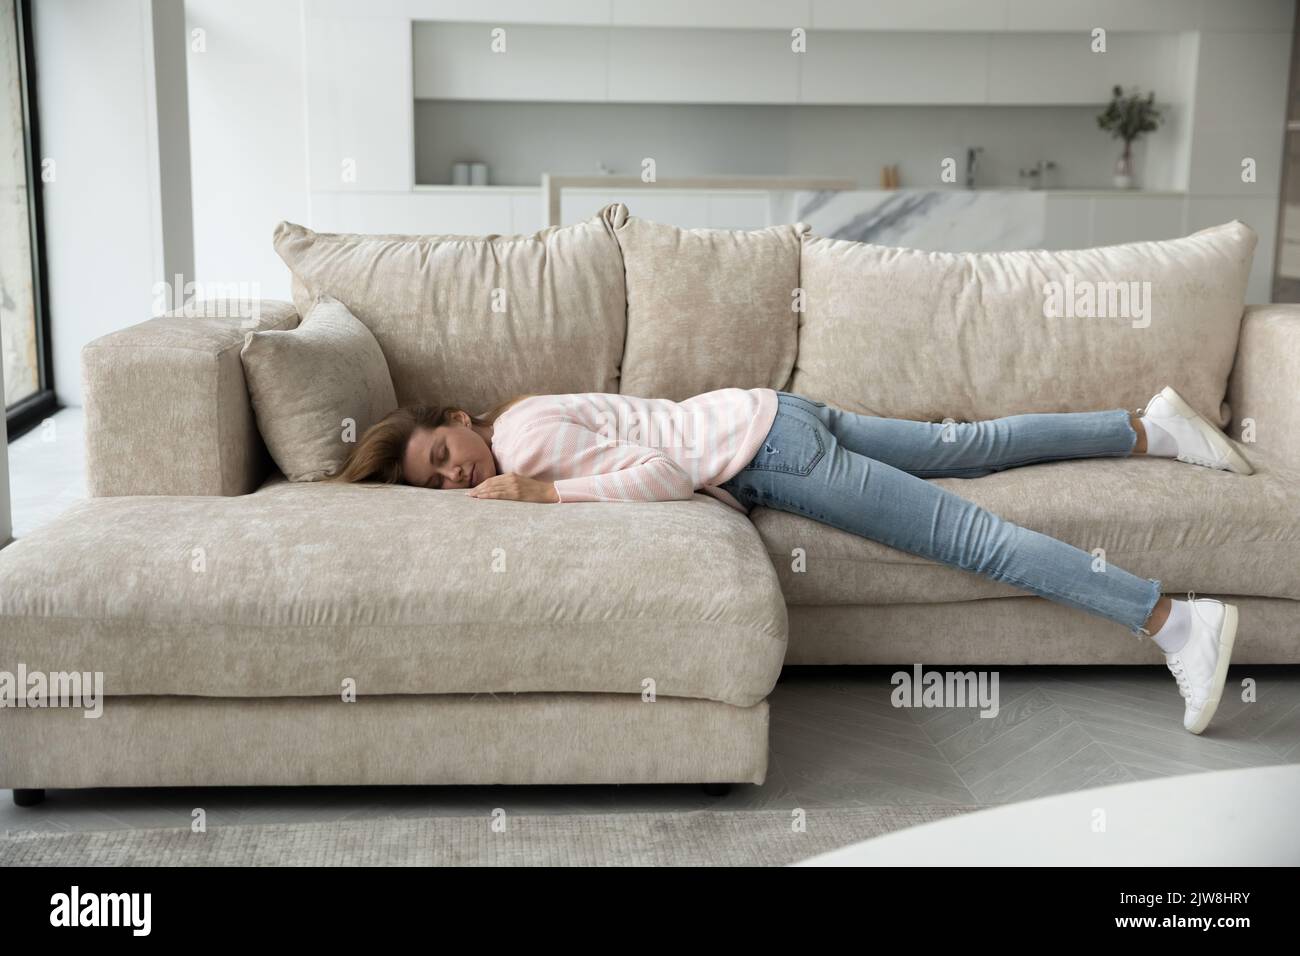 Sleeping young woman resting on home couch full length shot Stock Photo